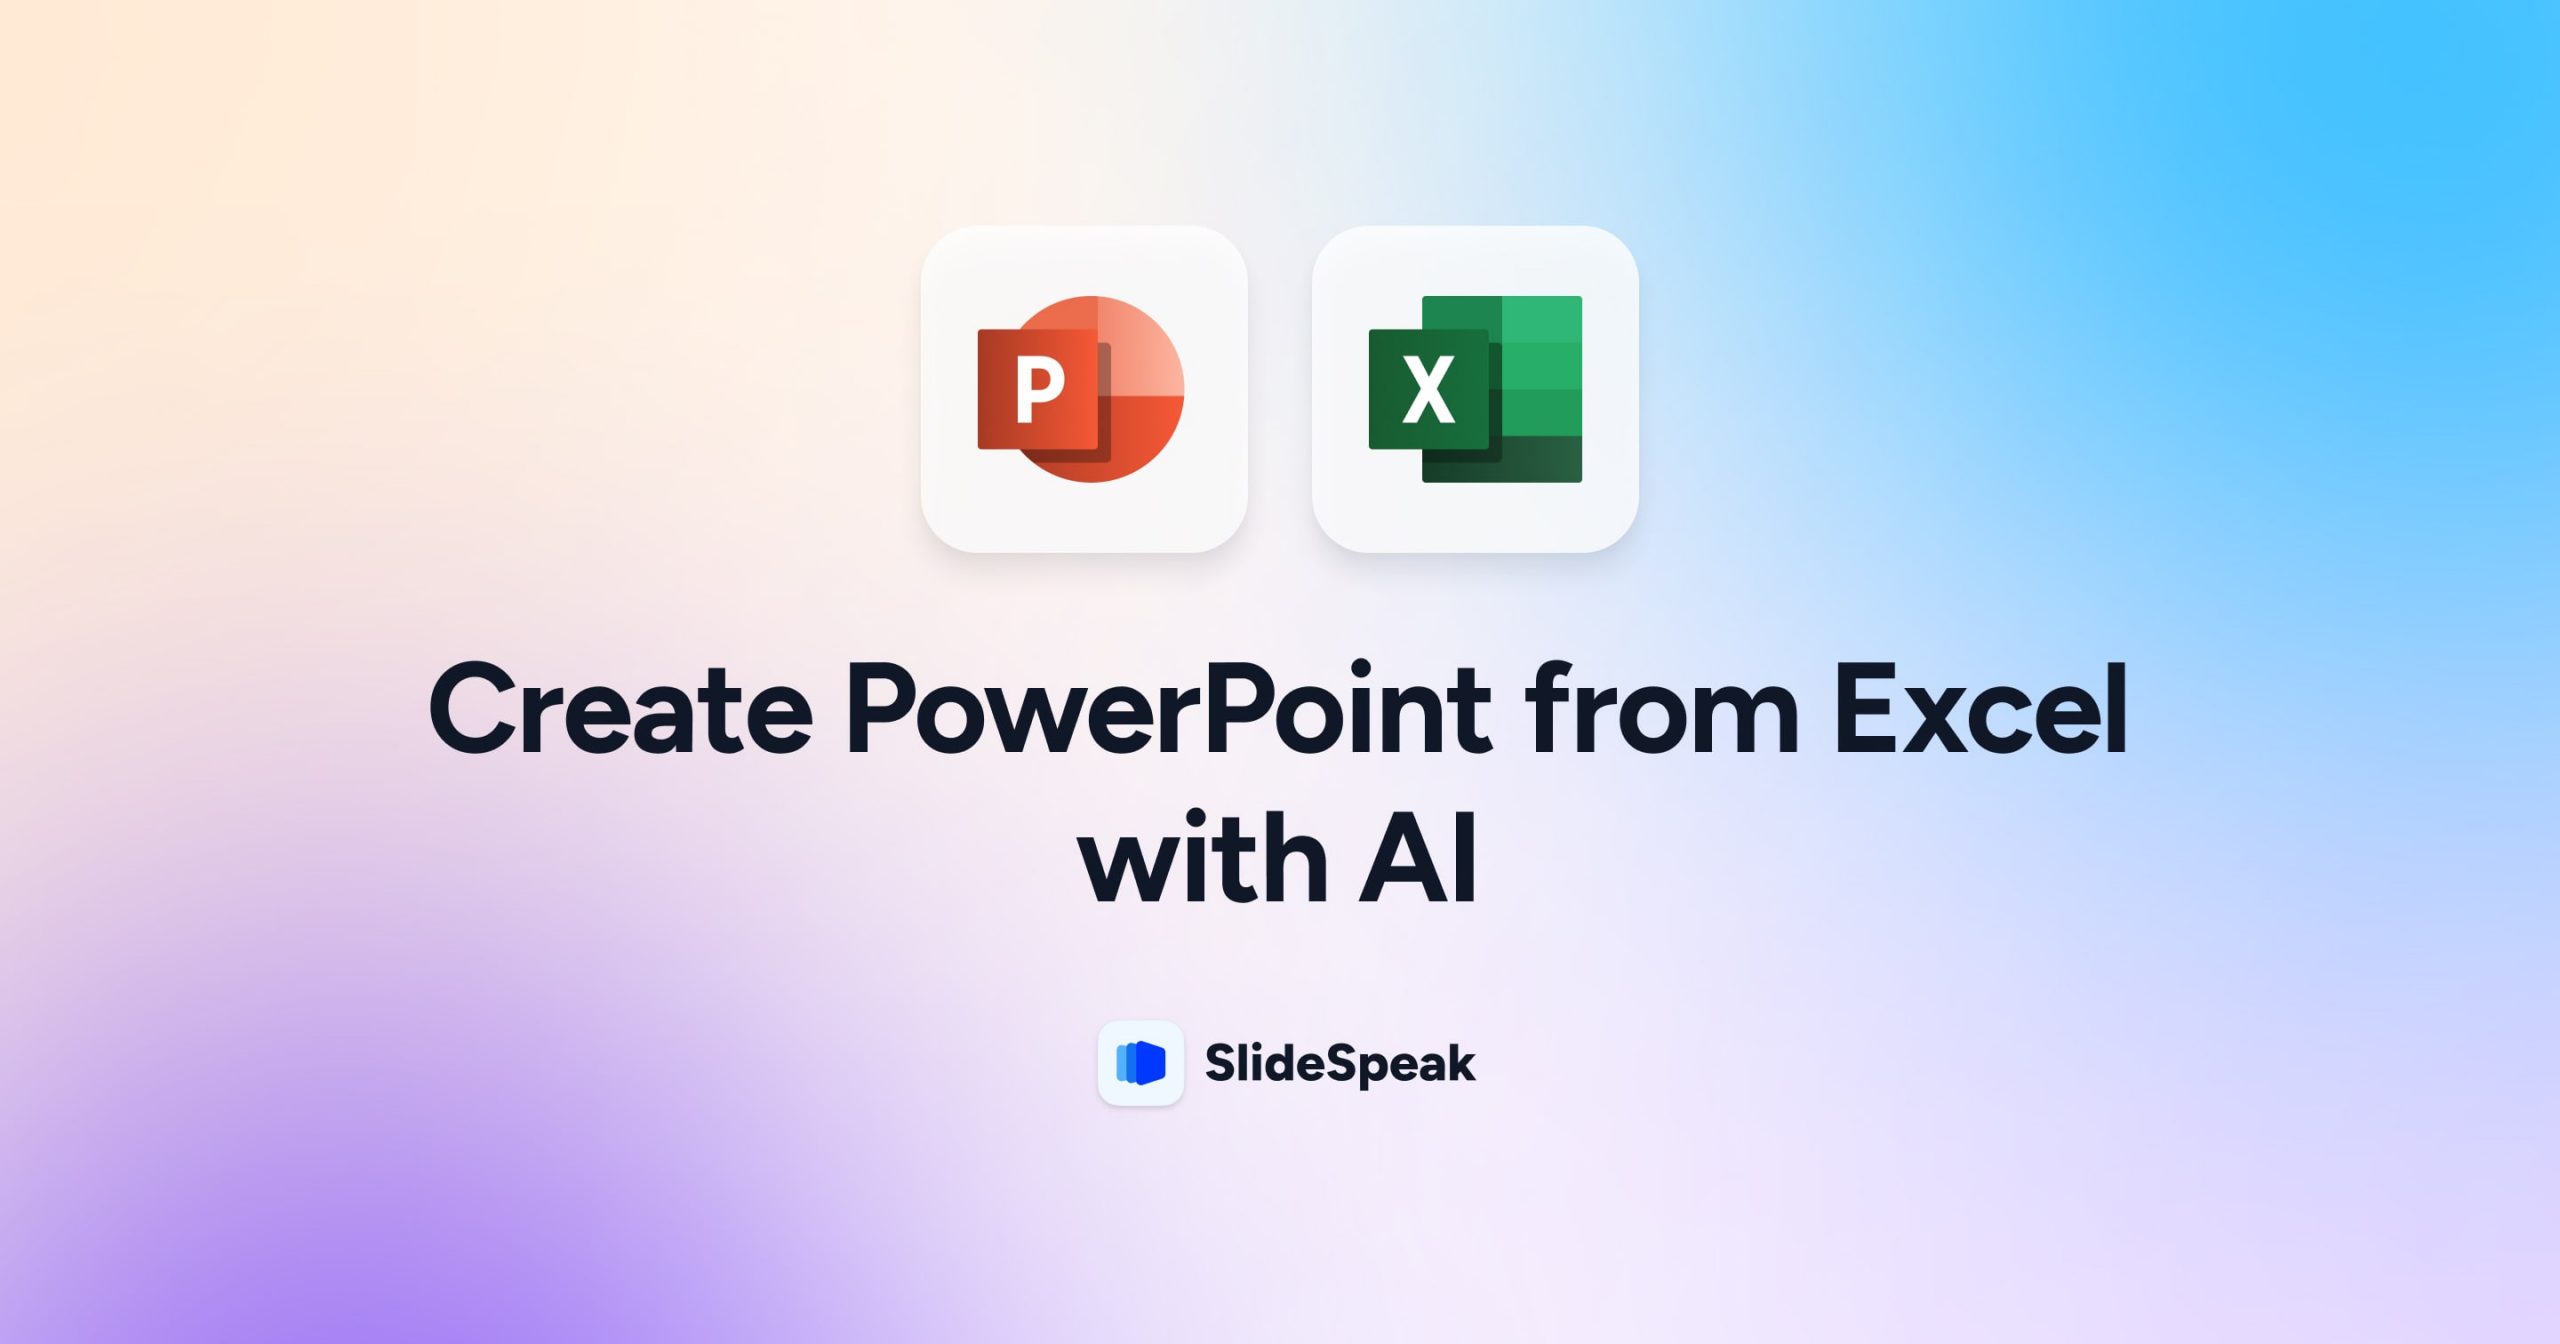 How to create PowerPoint from Excel